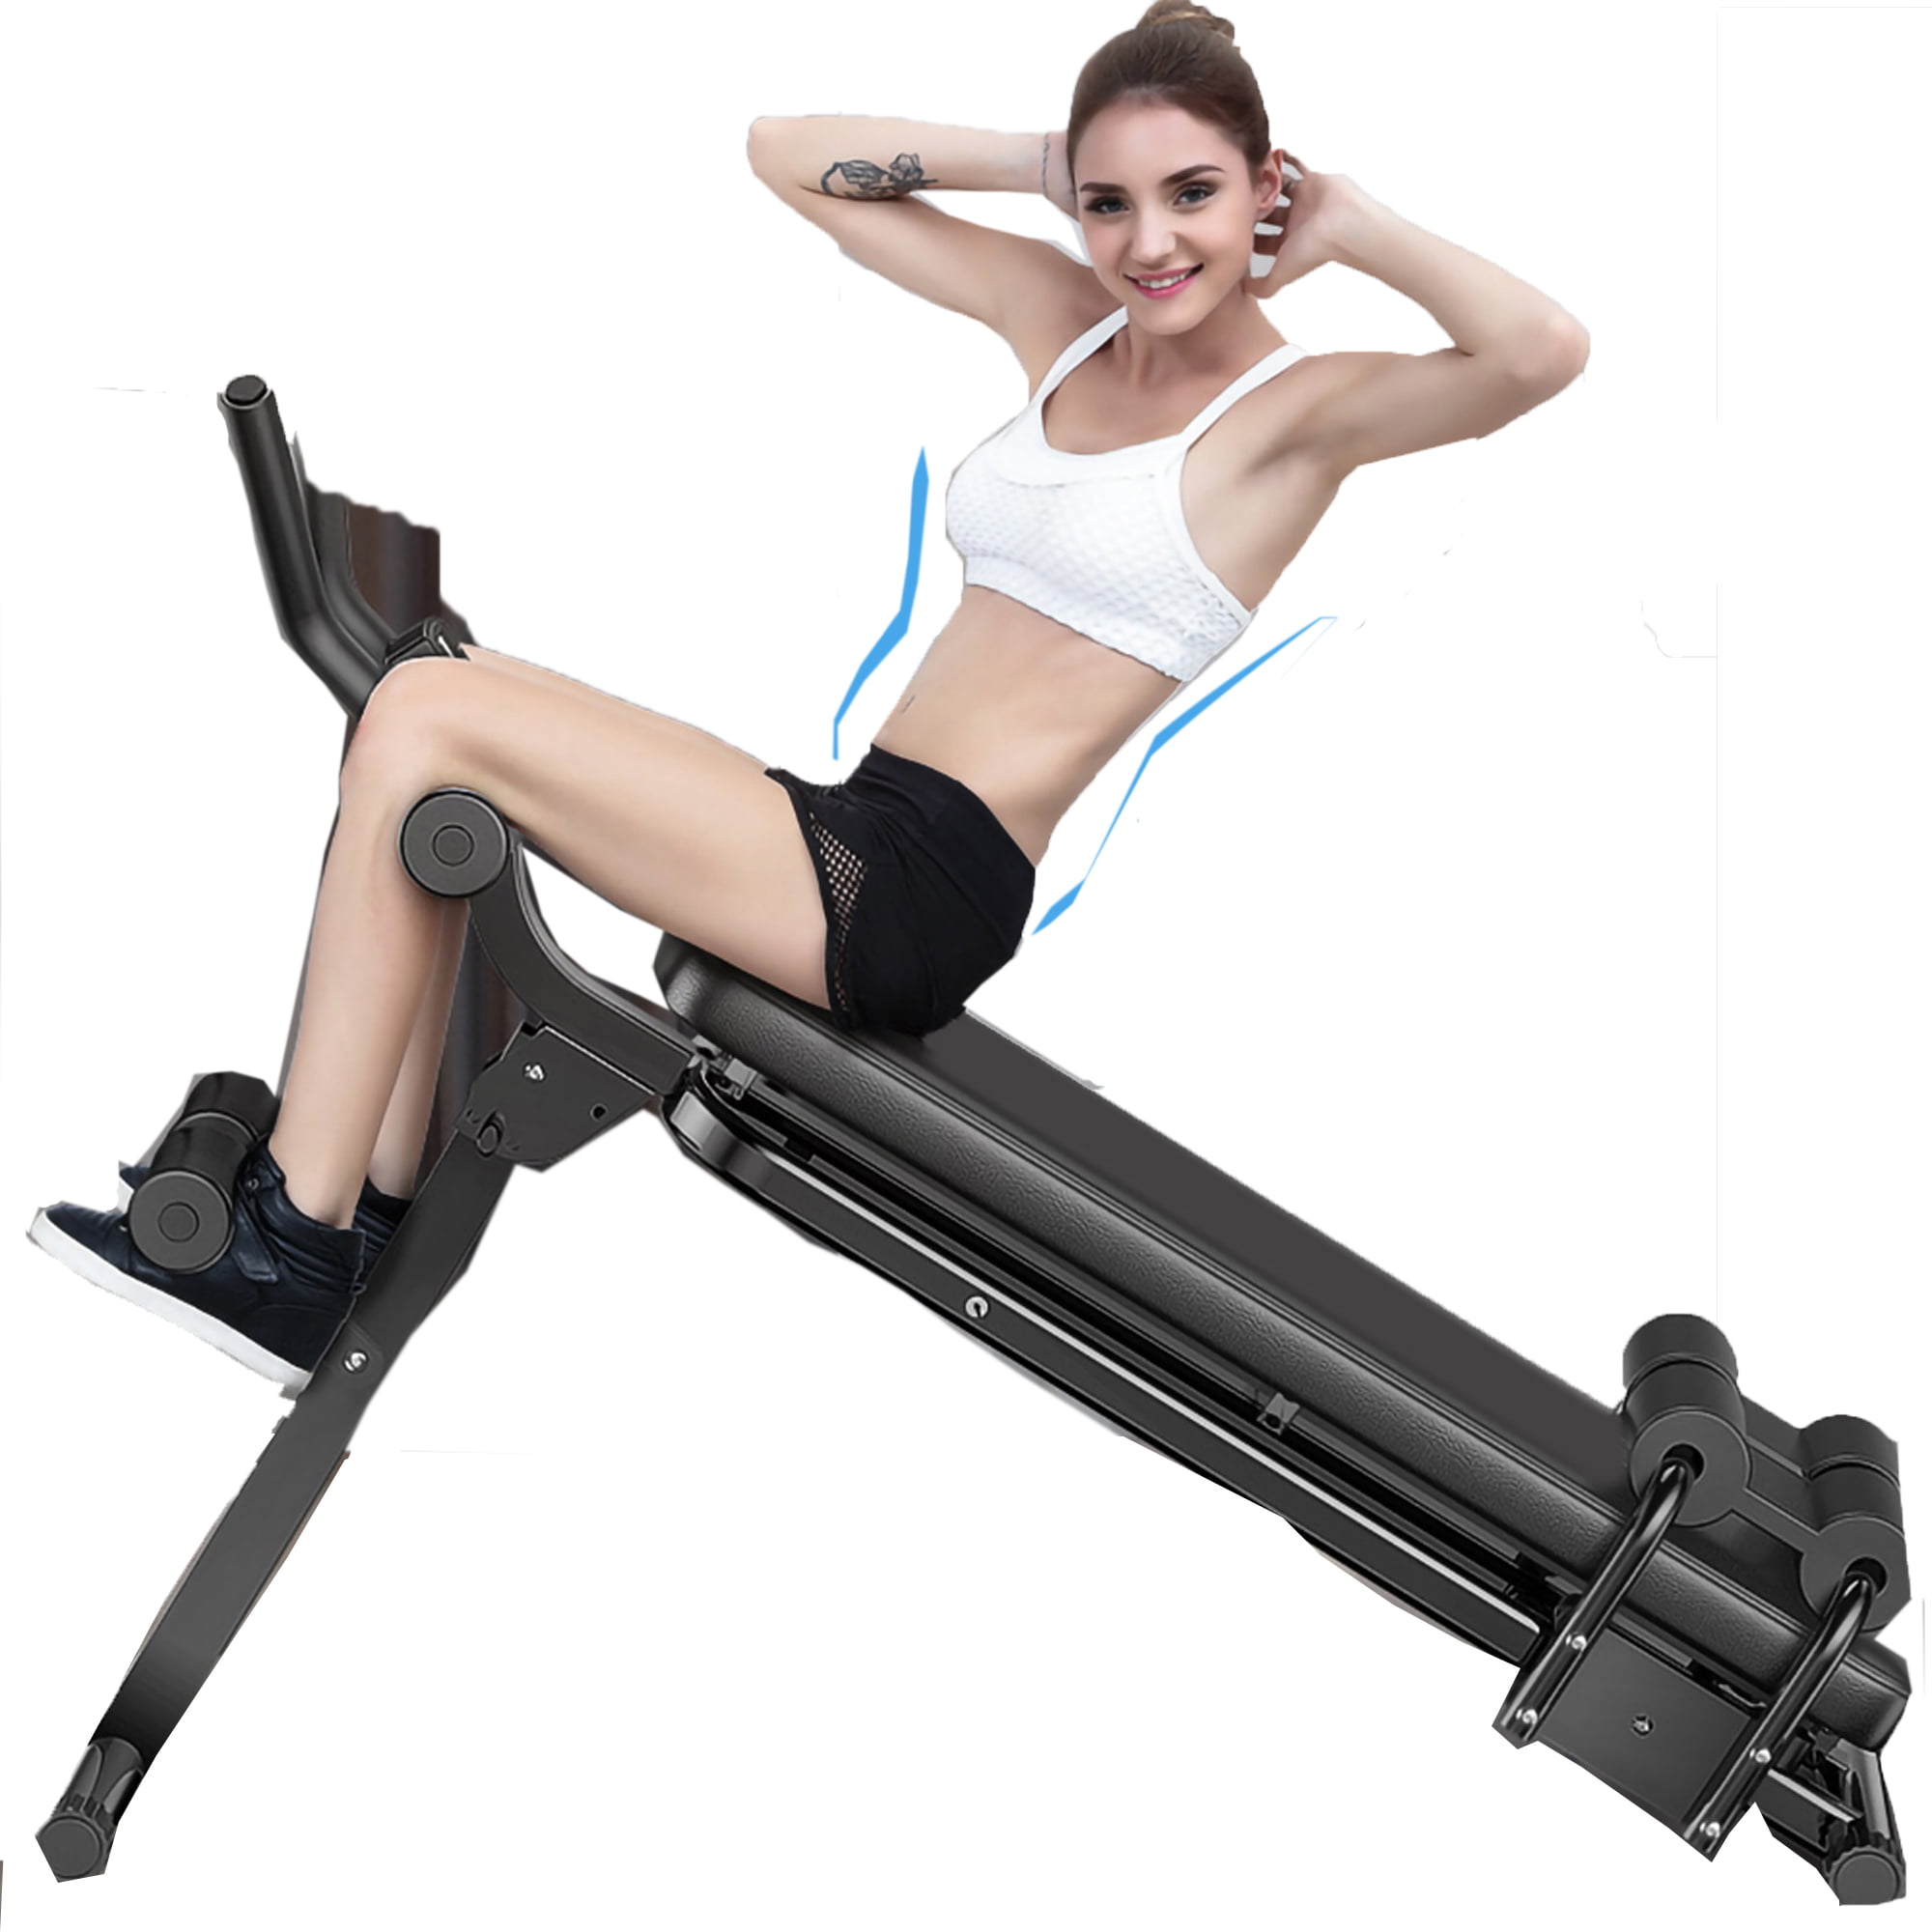 Adjustable Leg Lifts for Home Office Details about   Multifunctional Sit Up Bench with Handle